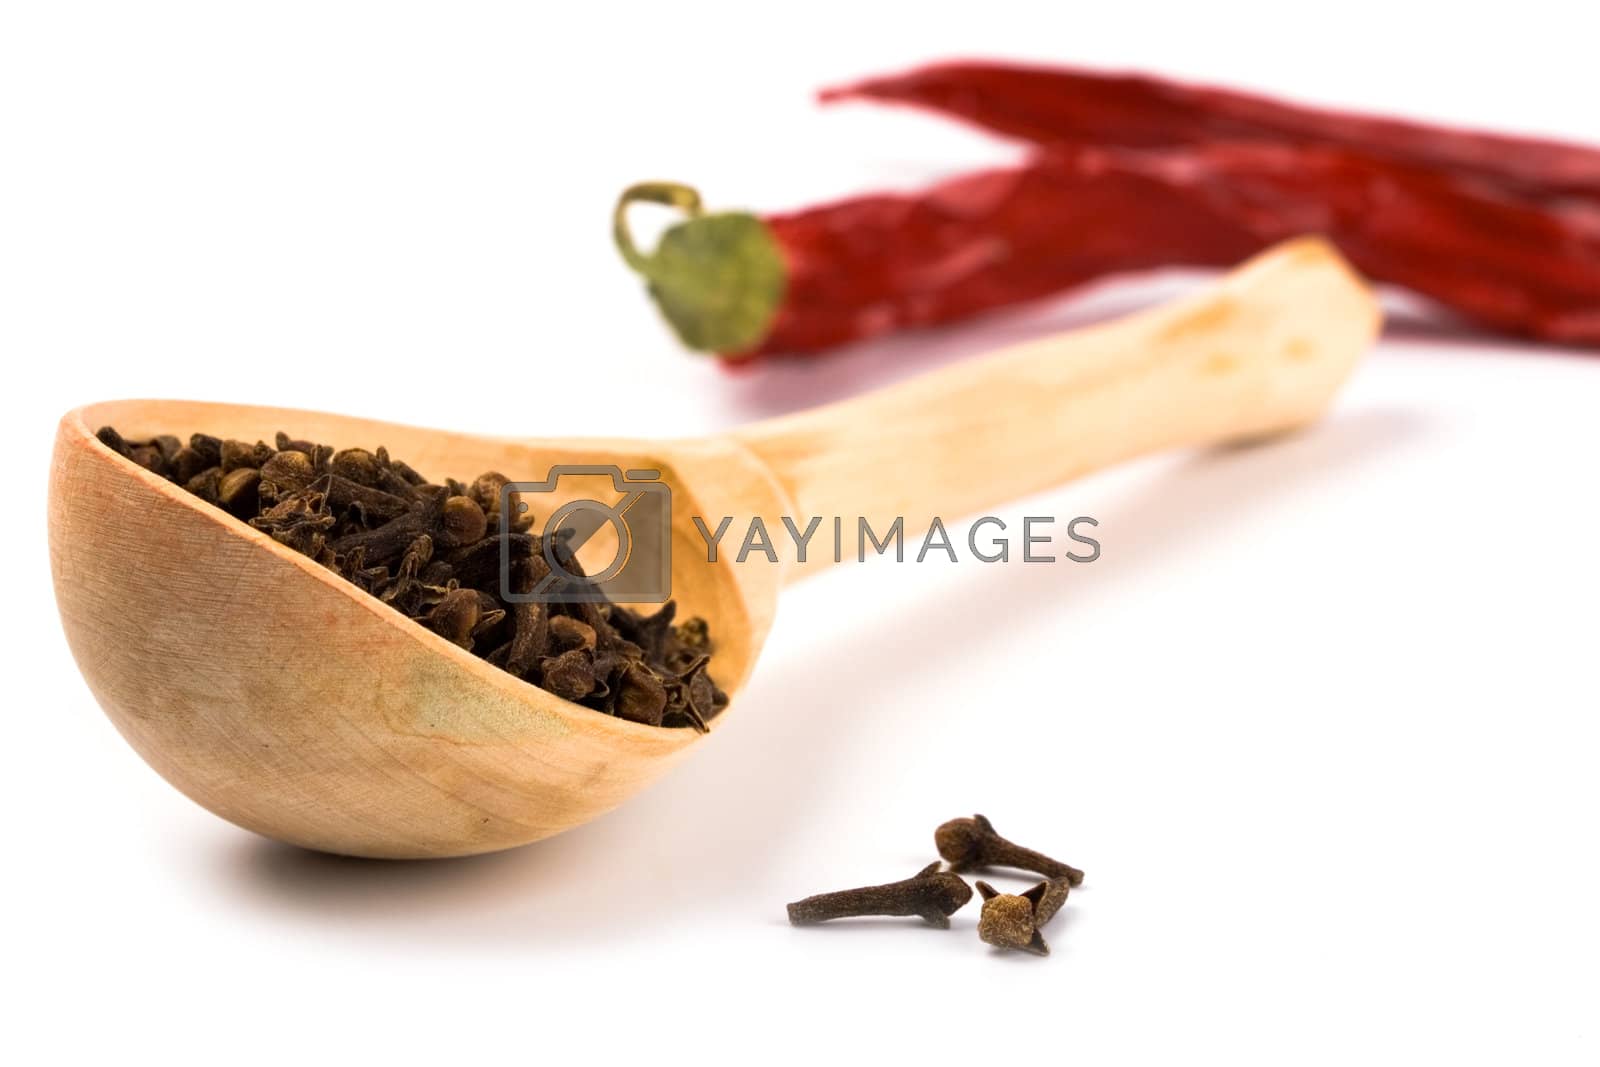 Royalty free image of spices by marylooo